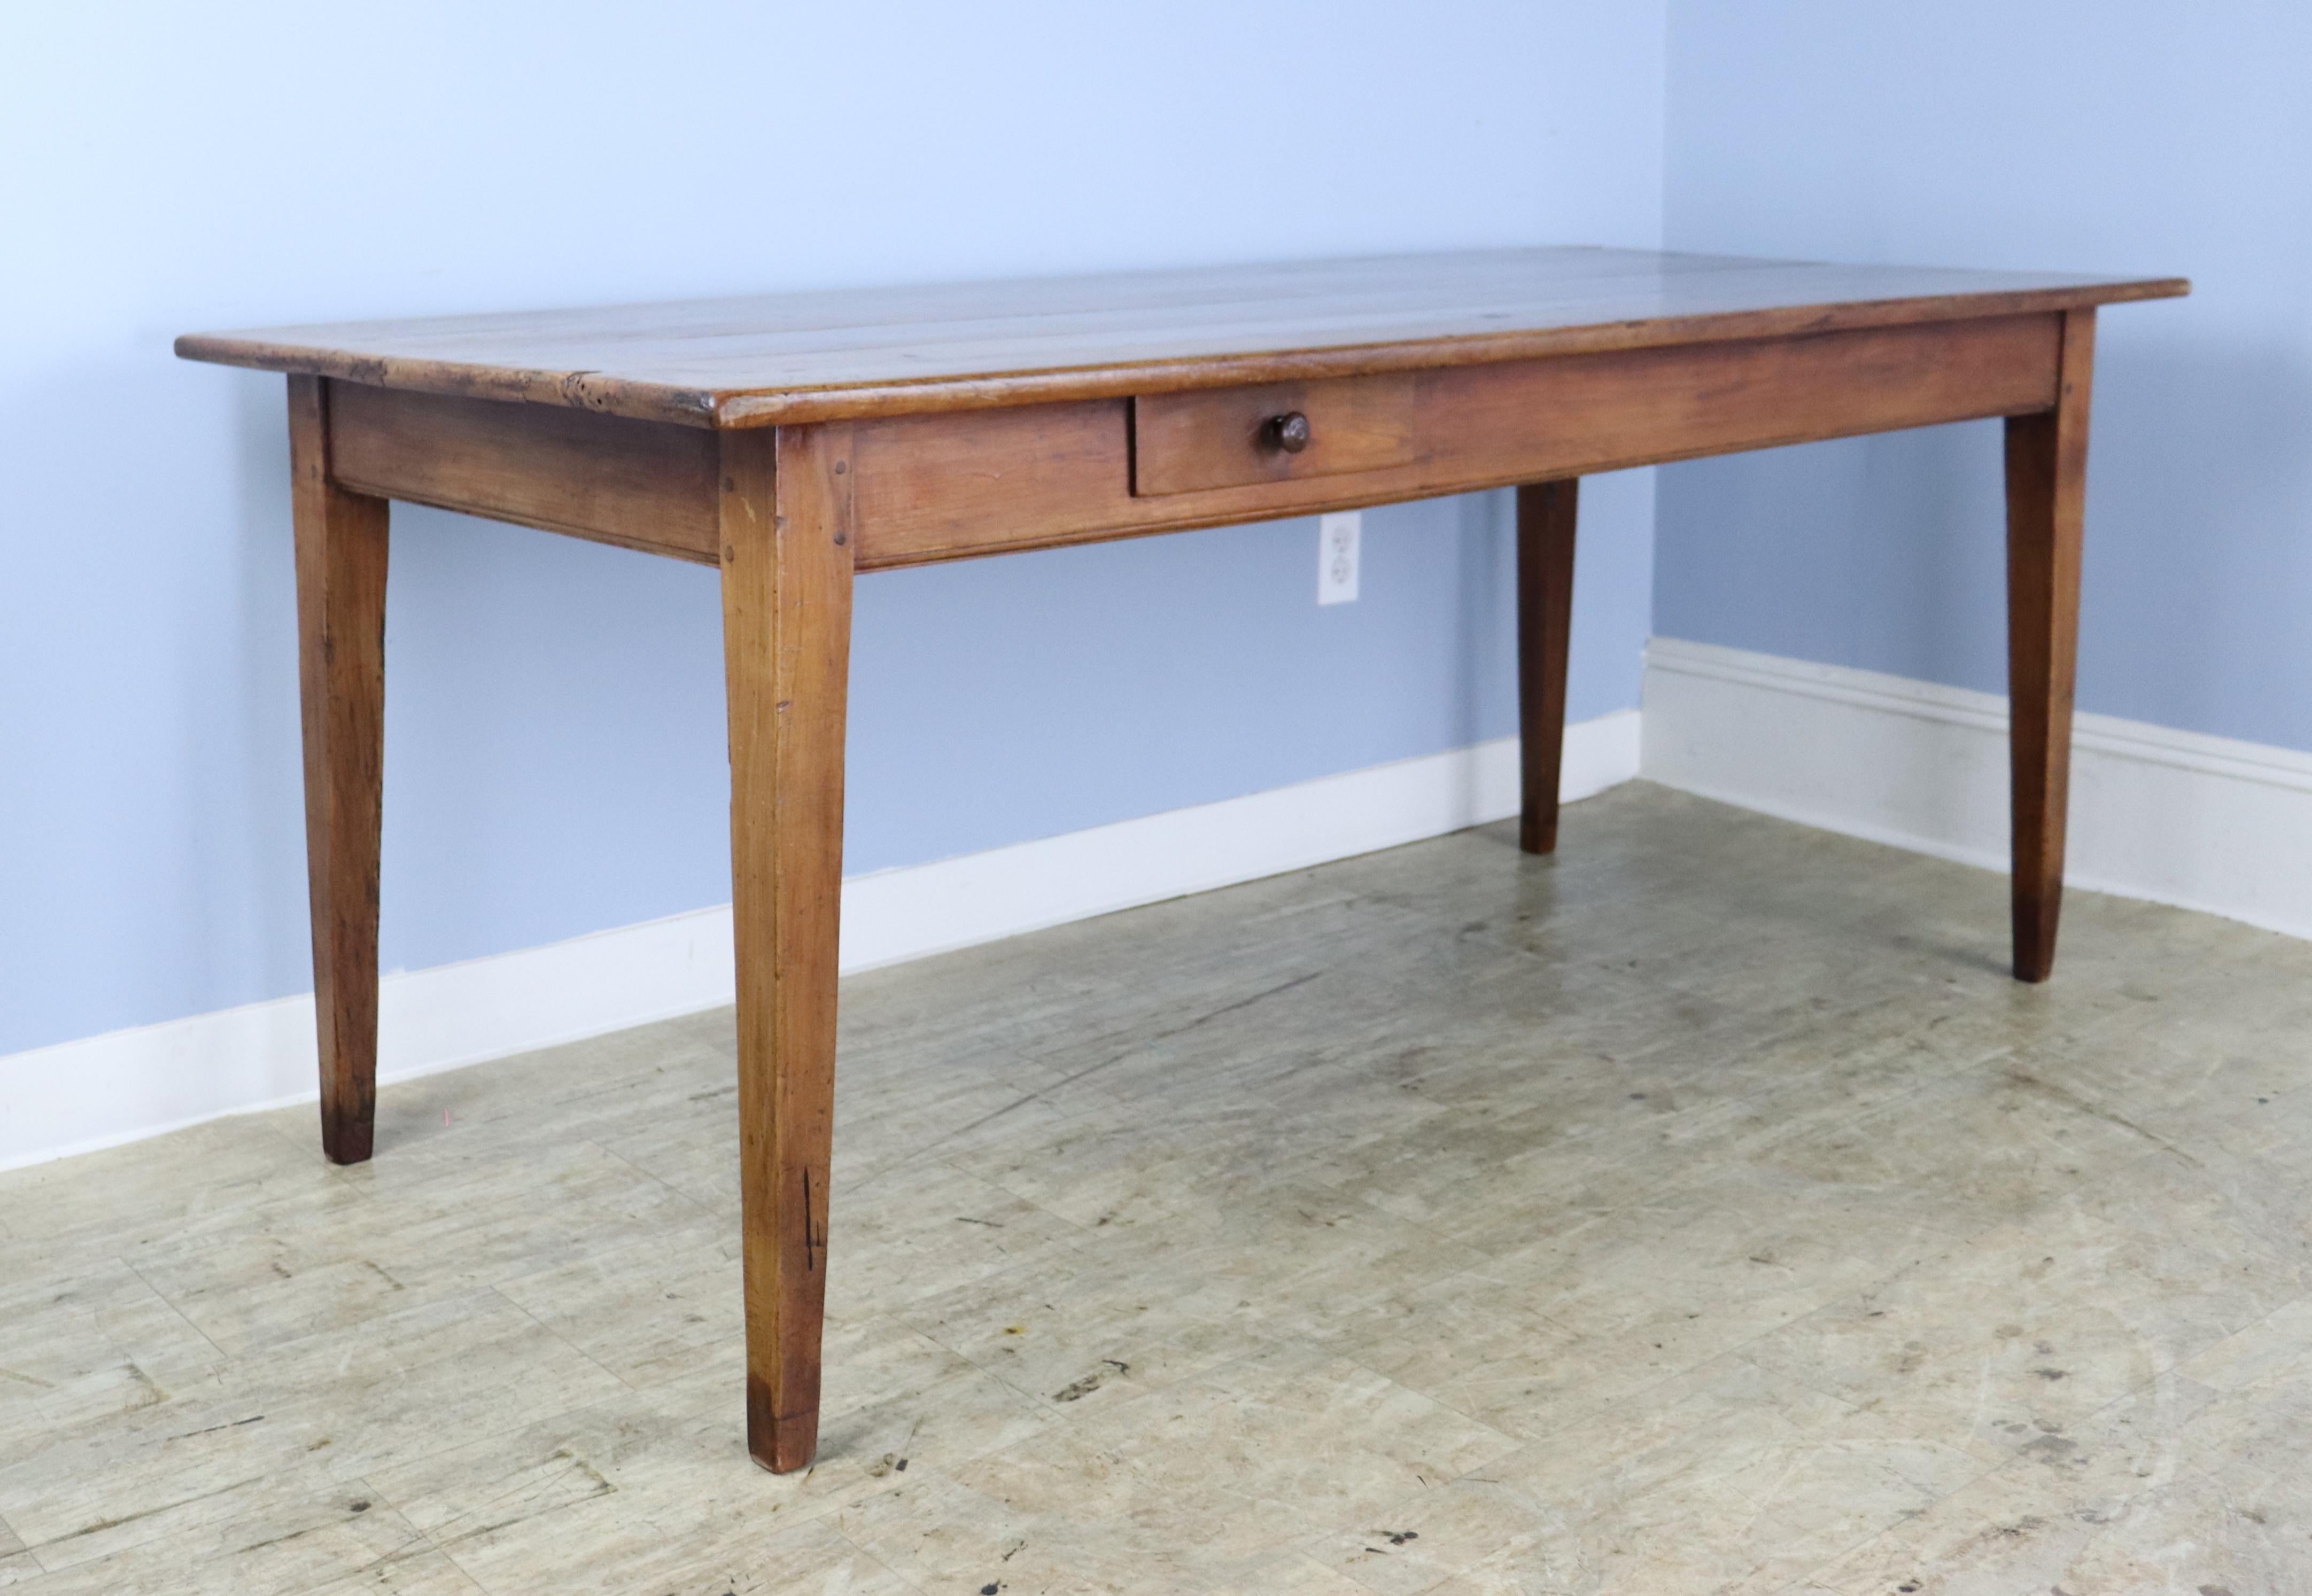 19th Century Antique Cherry Farm Table with Breadslide and Drawer For Sale